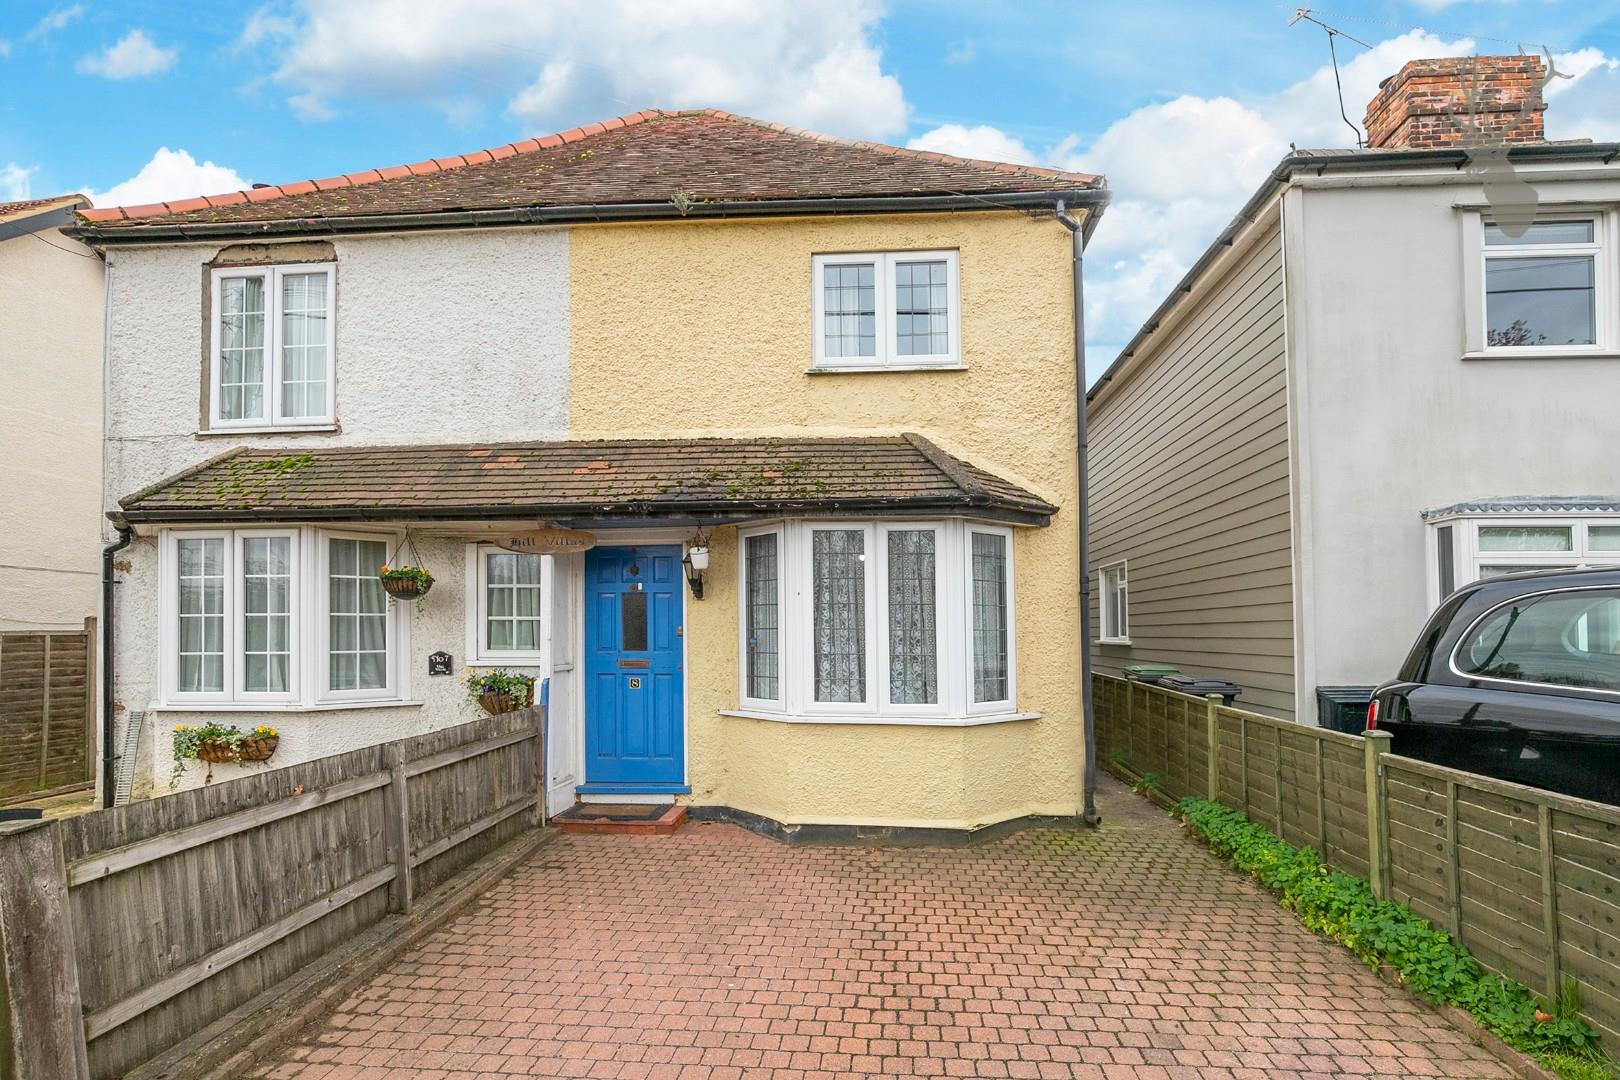 Similar Property: House - Semi-Detached in Harlow